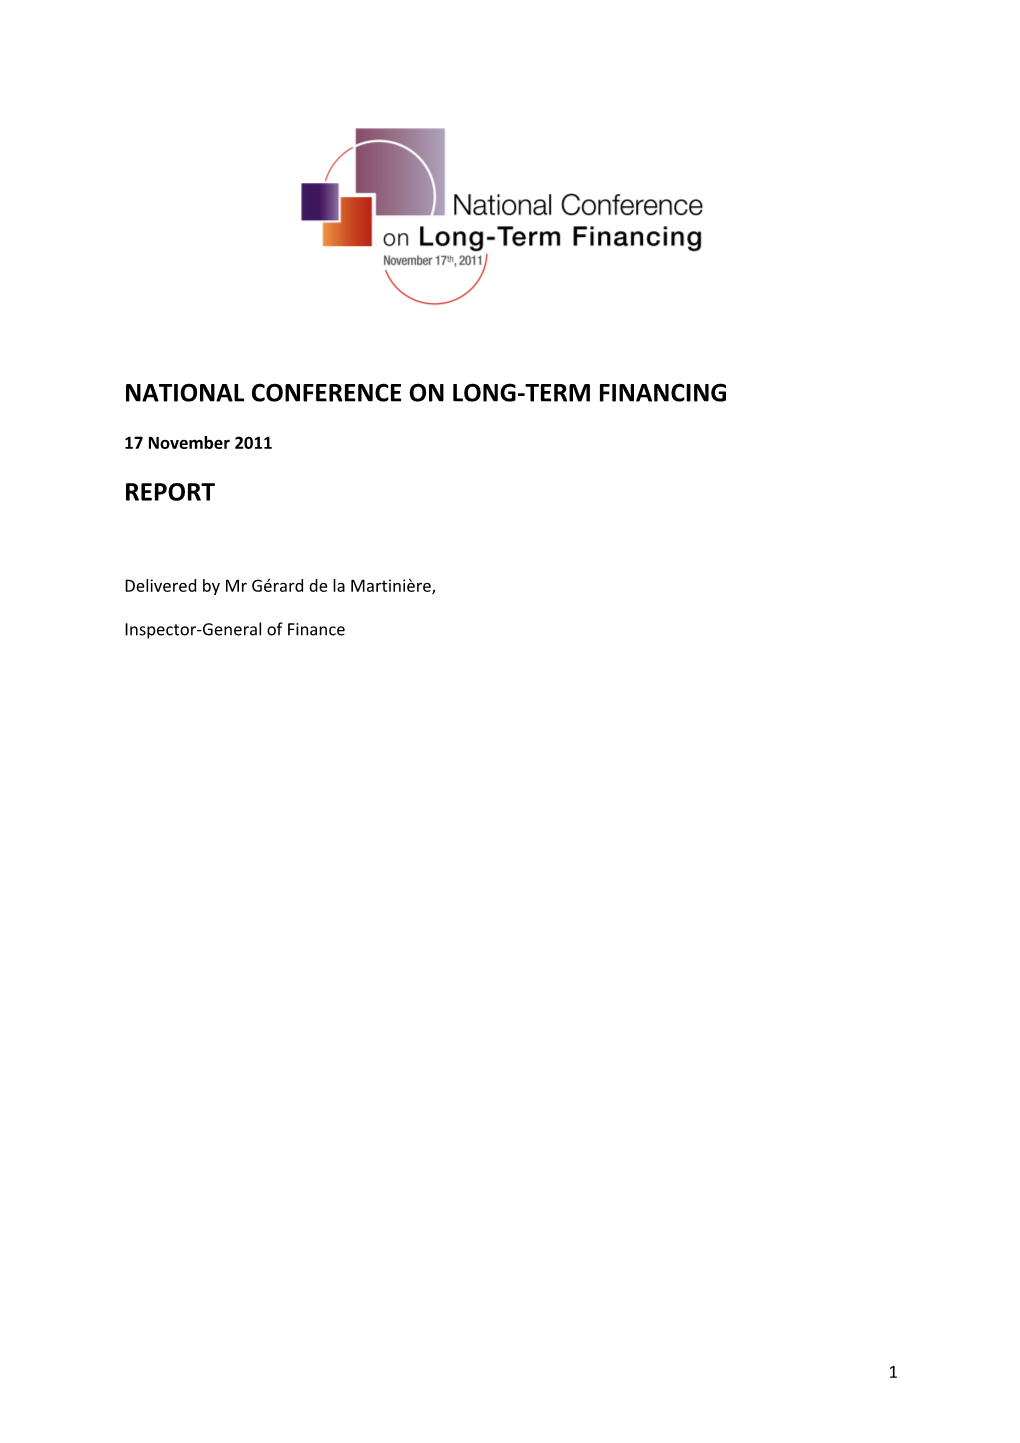 National Conference on Long-Term Financing